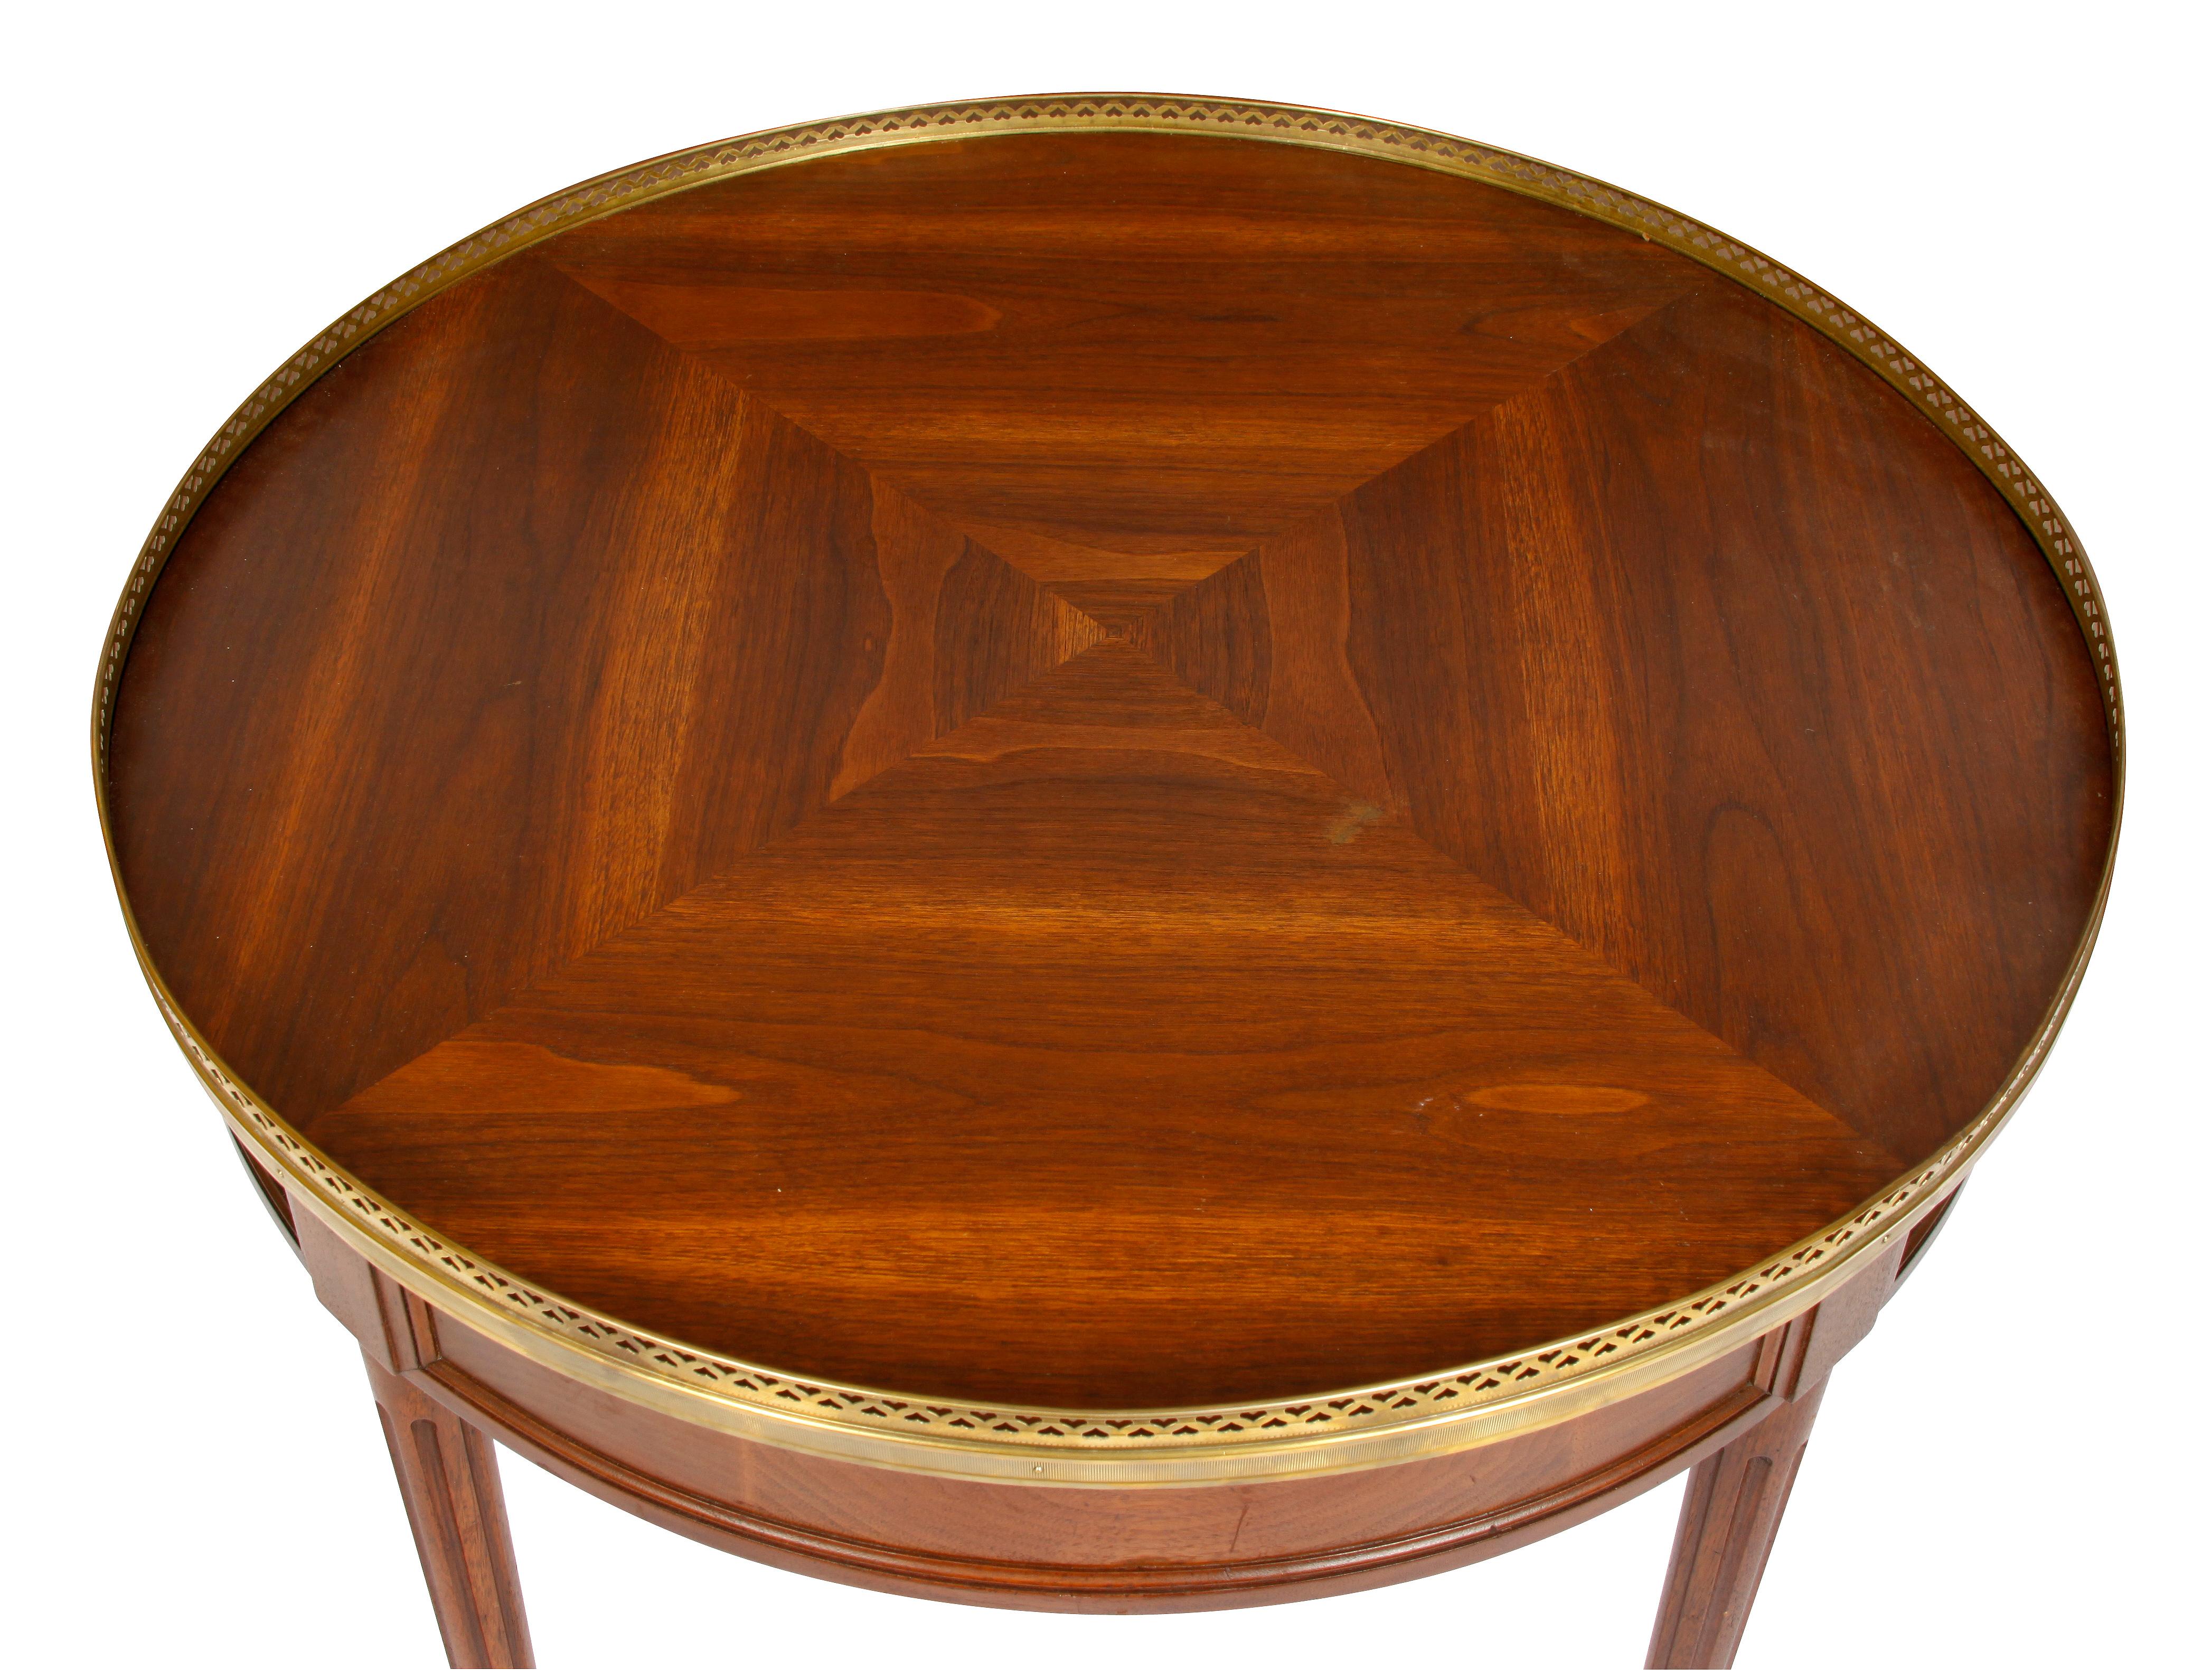 French round bouillotte table with wood top in a concentric square design and brass gallery.